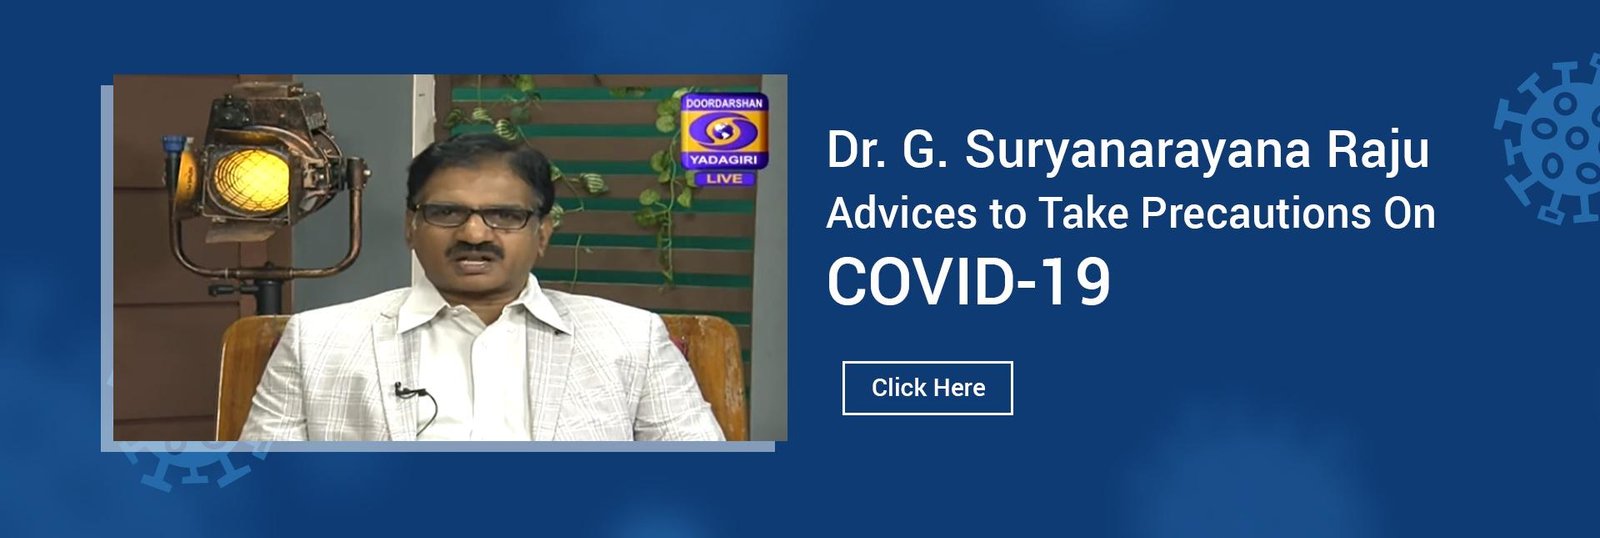 Advices to Take Precautions on Covid-19